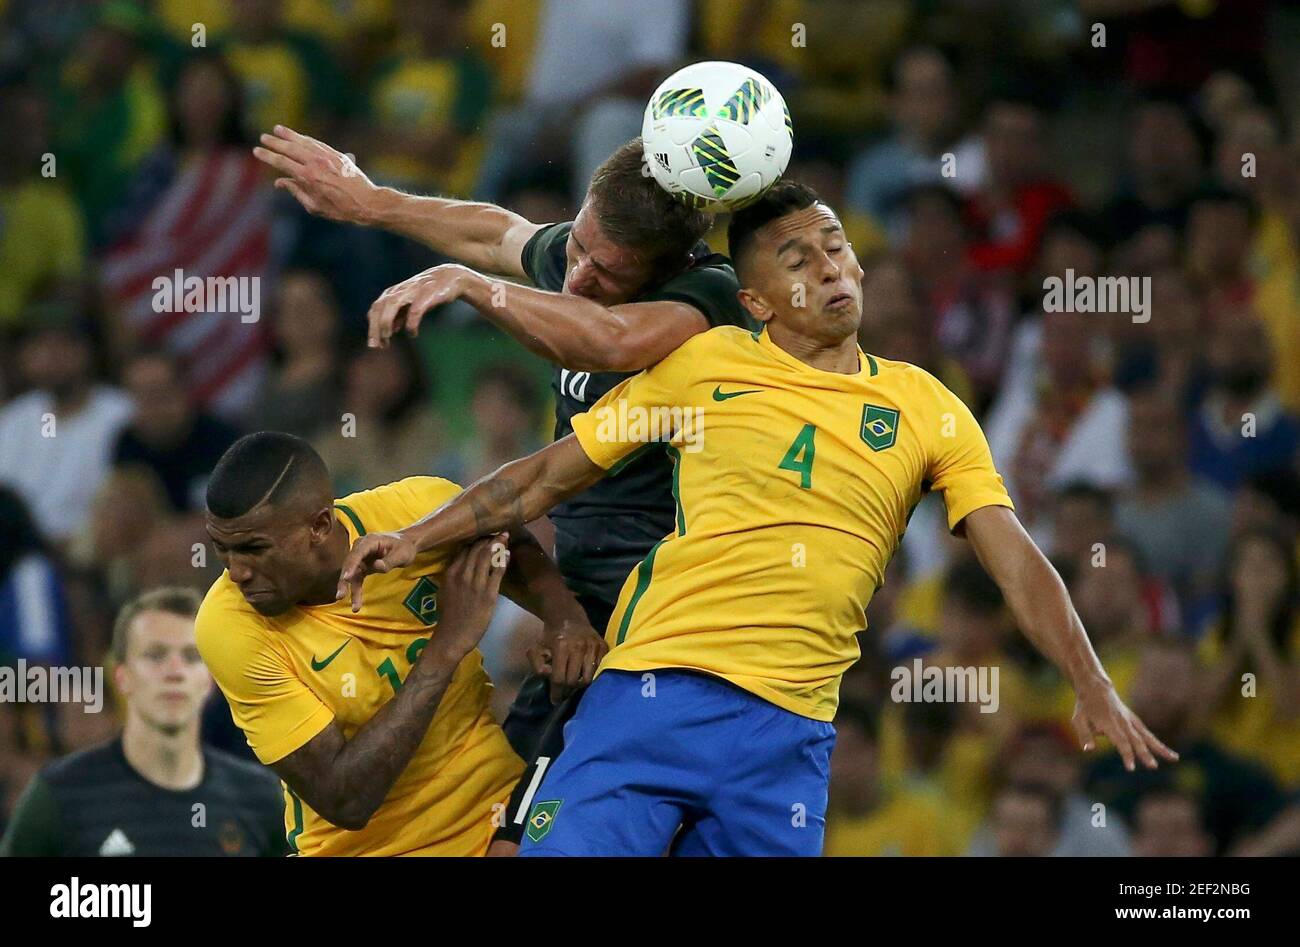 2016 Rio Olympics - Soccer - Final - Men's Football Tournament Gold Medal Match Brazil vs Germany - Maracana - Rio de Janeiro, Brazil - 20/08/2016.  Nils Petersen (GER) (C) of Germany collides with Walace (BRA) and his compatriot Marquinhos (R) in their gold medal men's football match.  REUTERS/Bruno Kelly  FOR EDITORIAL USE ONLY. NOT FOR SALE FOR MARKETING OR ADVERTISING CAMPAIGNS.   Picture Supplied by Action Images Stock Photo